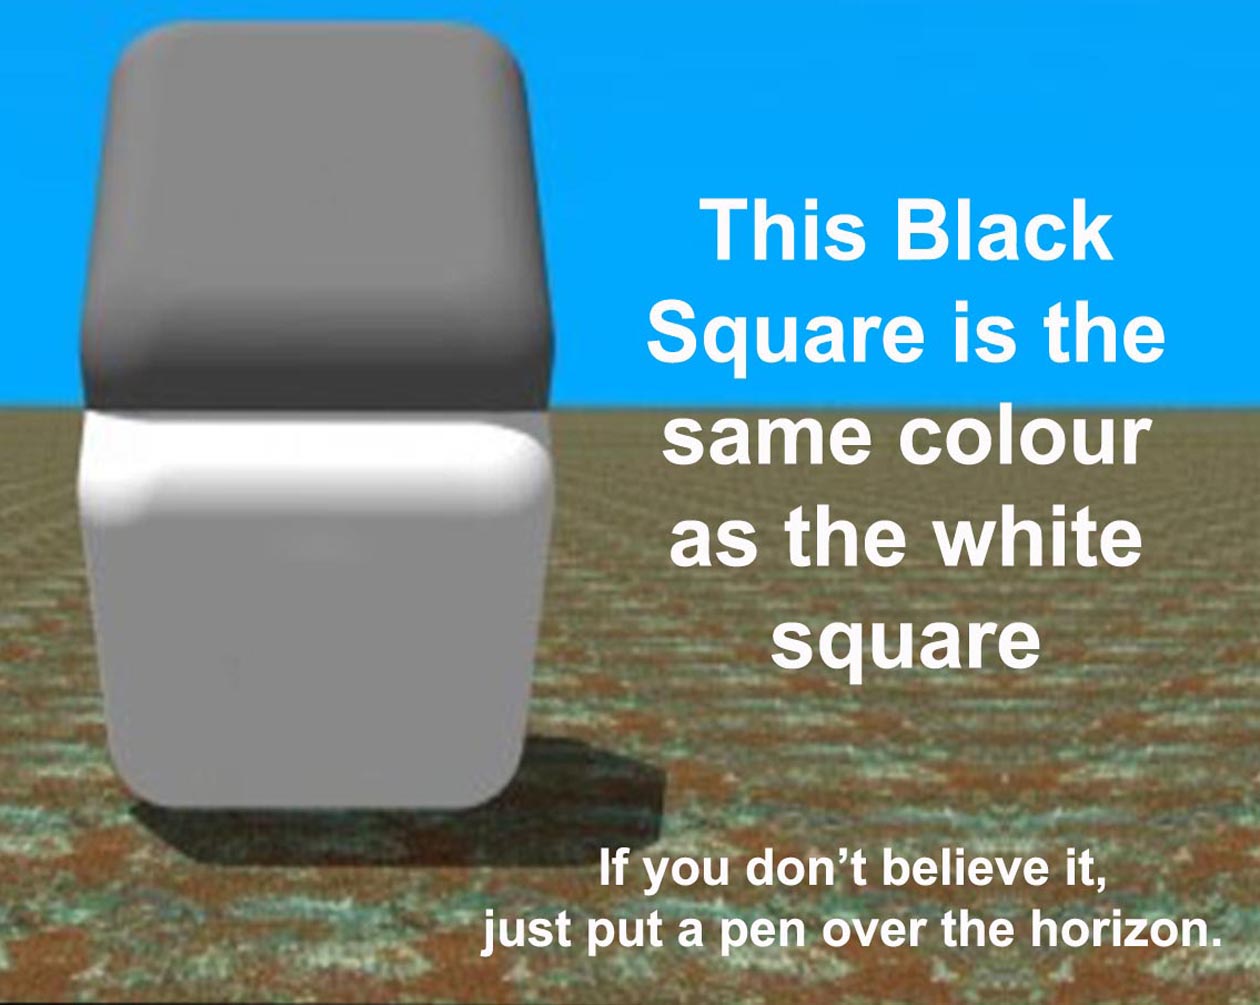 Both Square are identical in colour